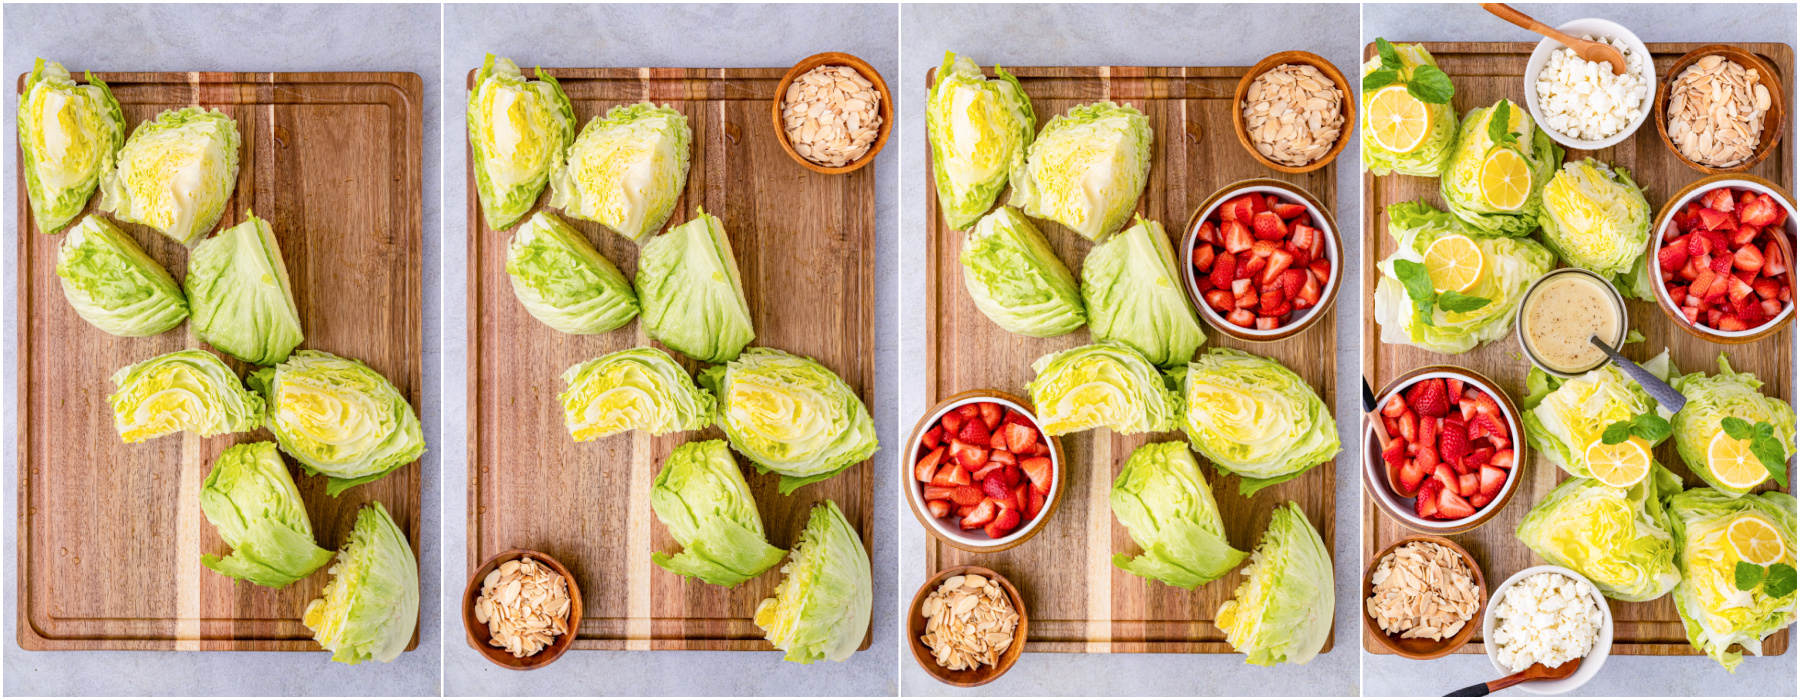 Process images showing how to arrange a Strawberry Feta Wedge Salad on a wooden board.